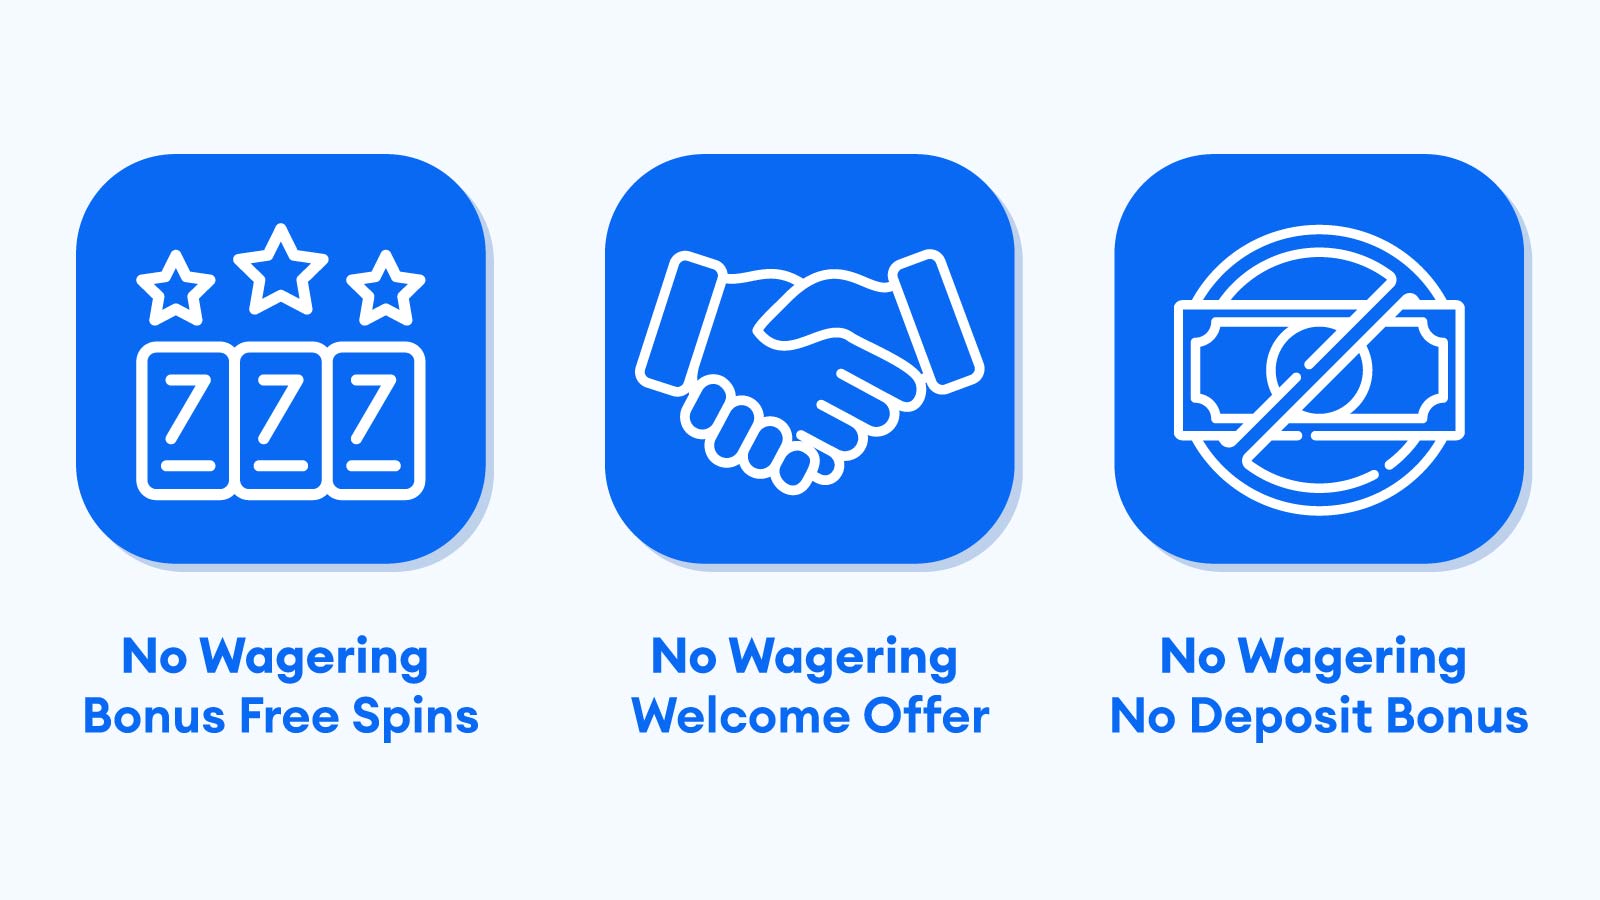 Types of No Wagering Bonuses